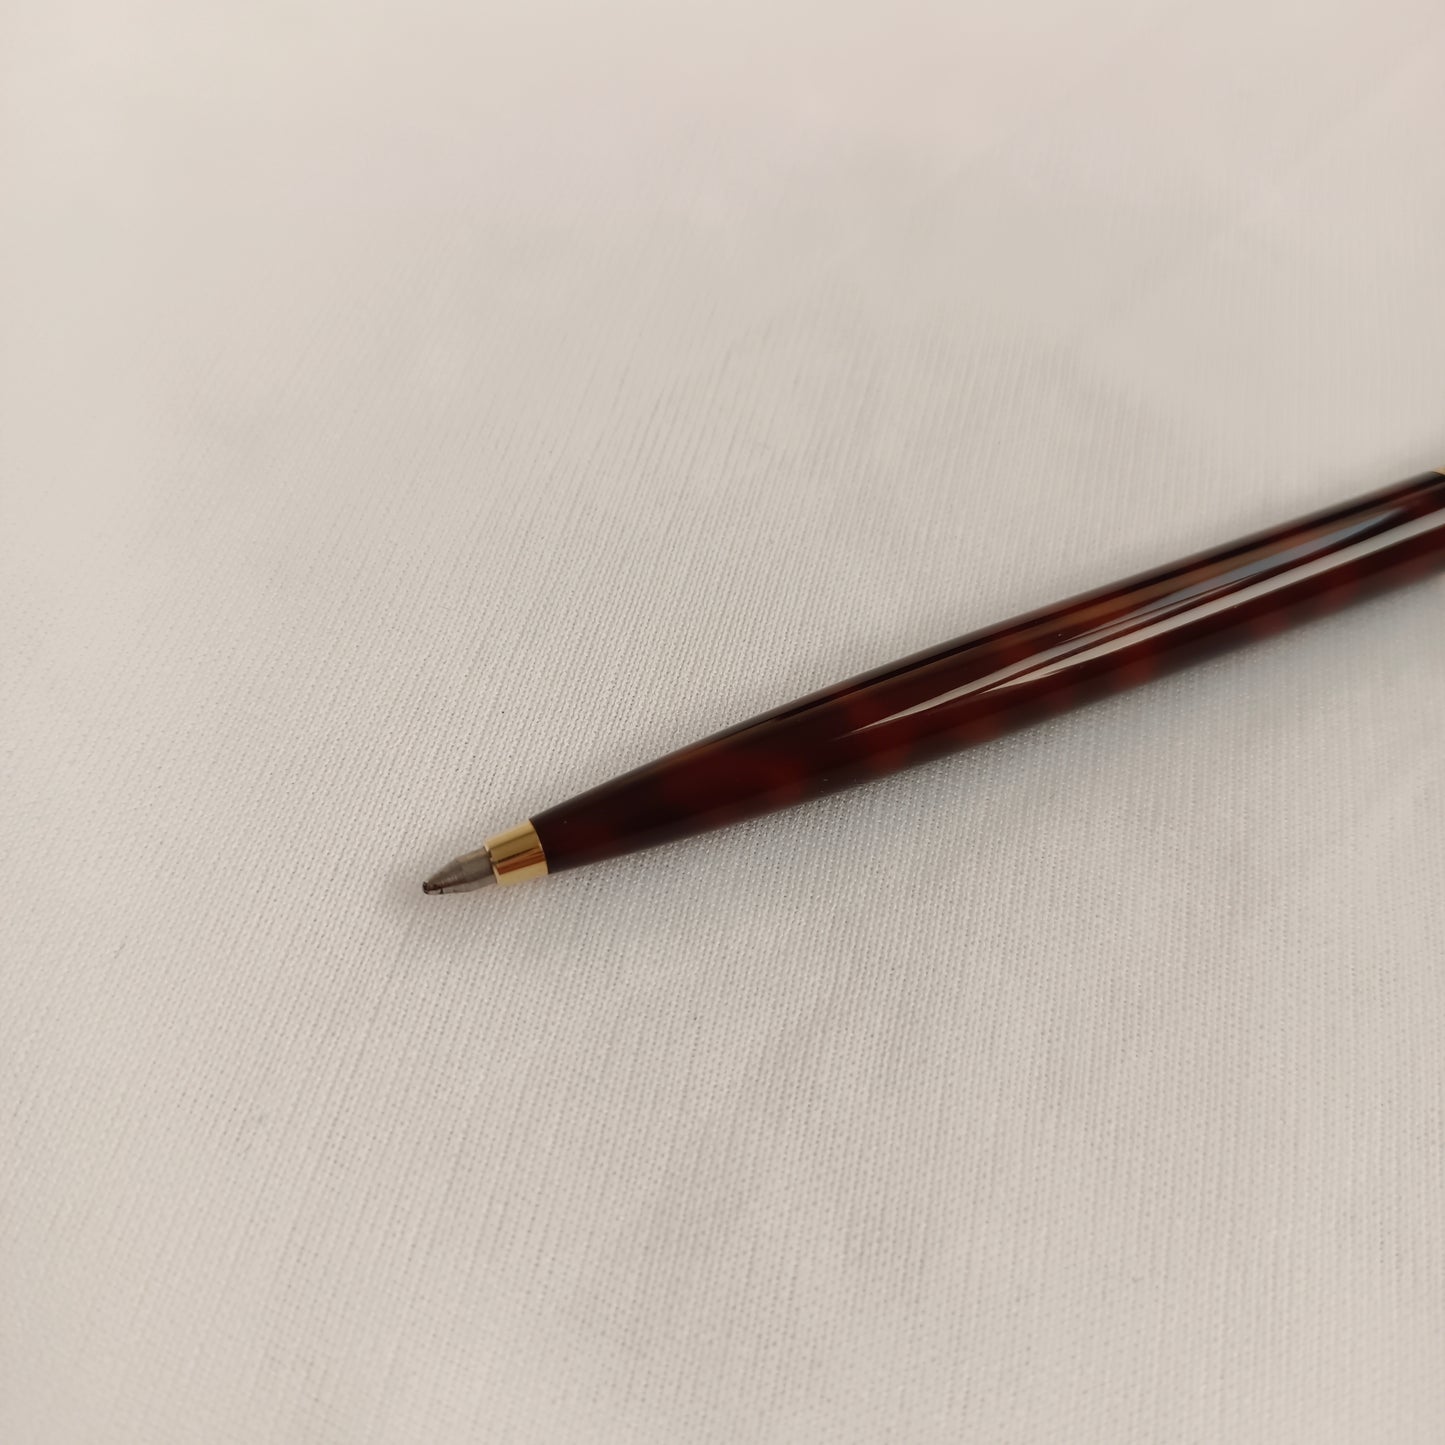 Elysee Classic / Classique Twist Ballpoint Pen in Red Marble